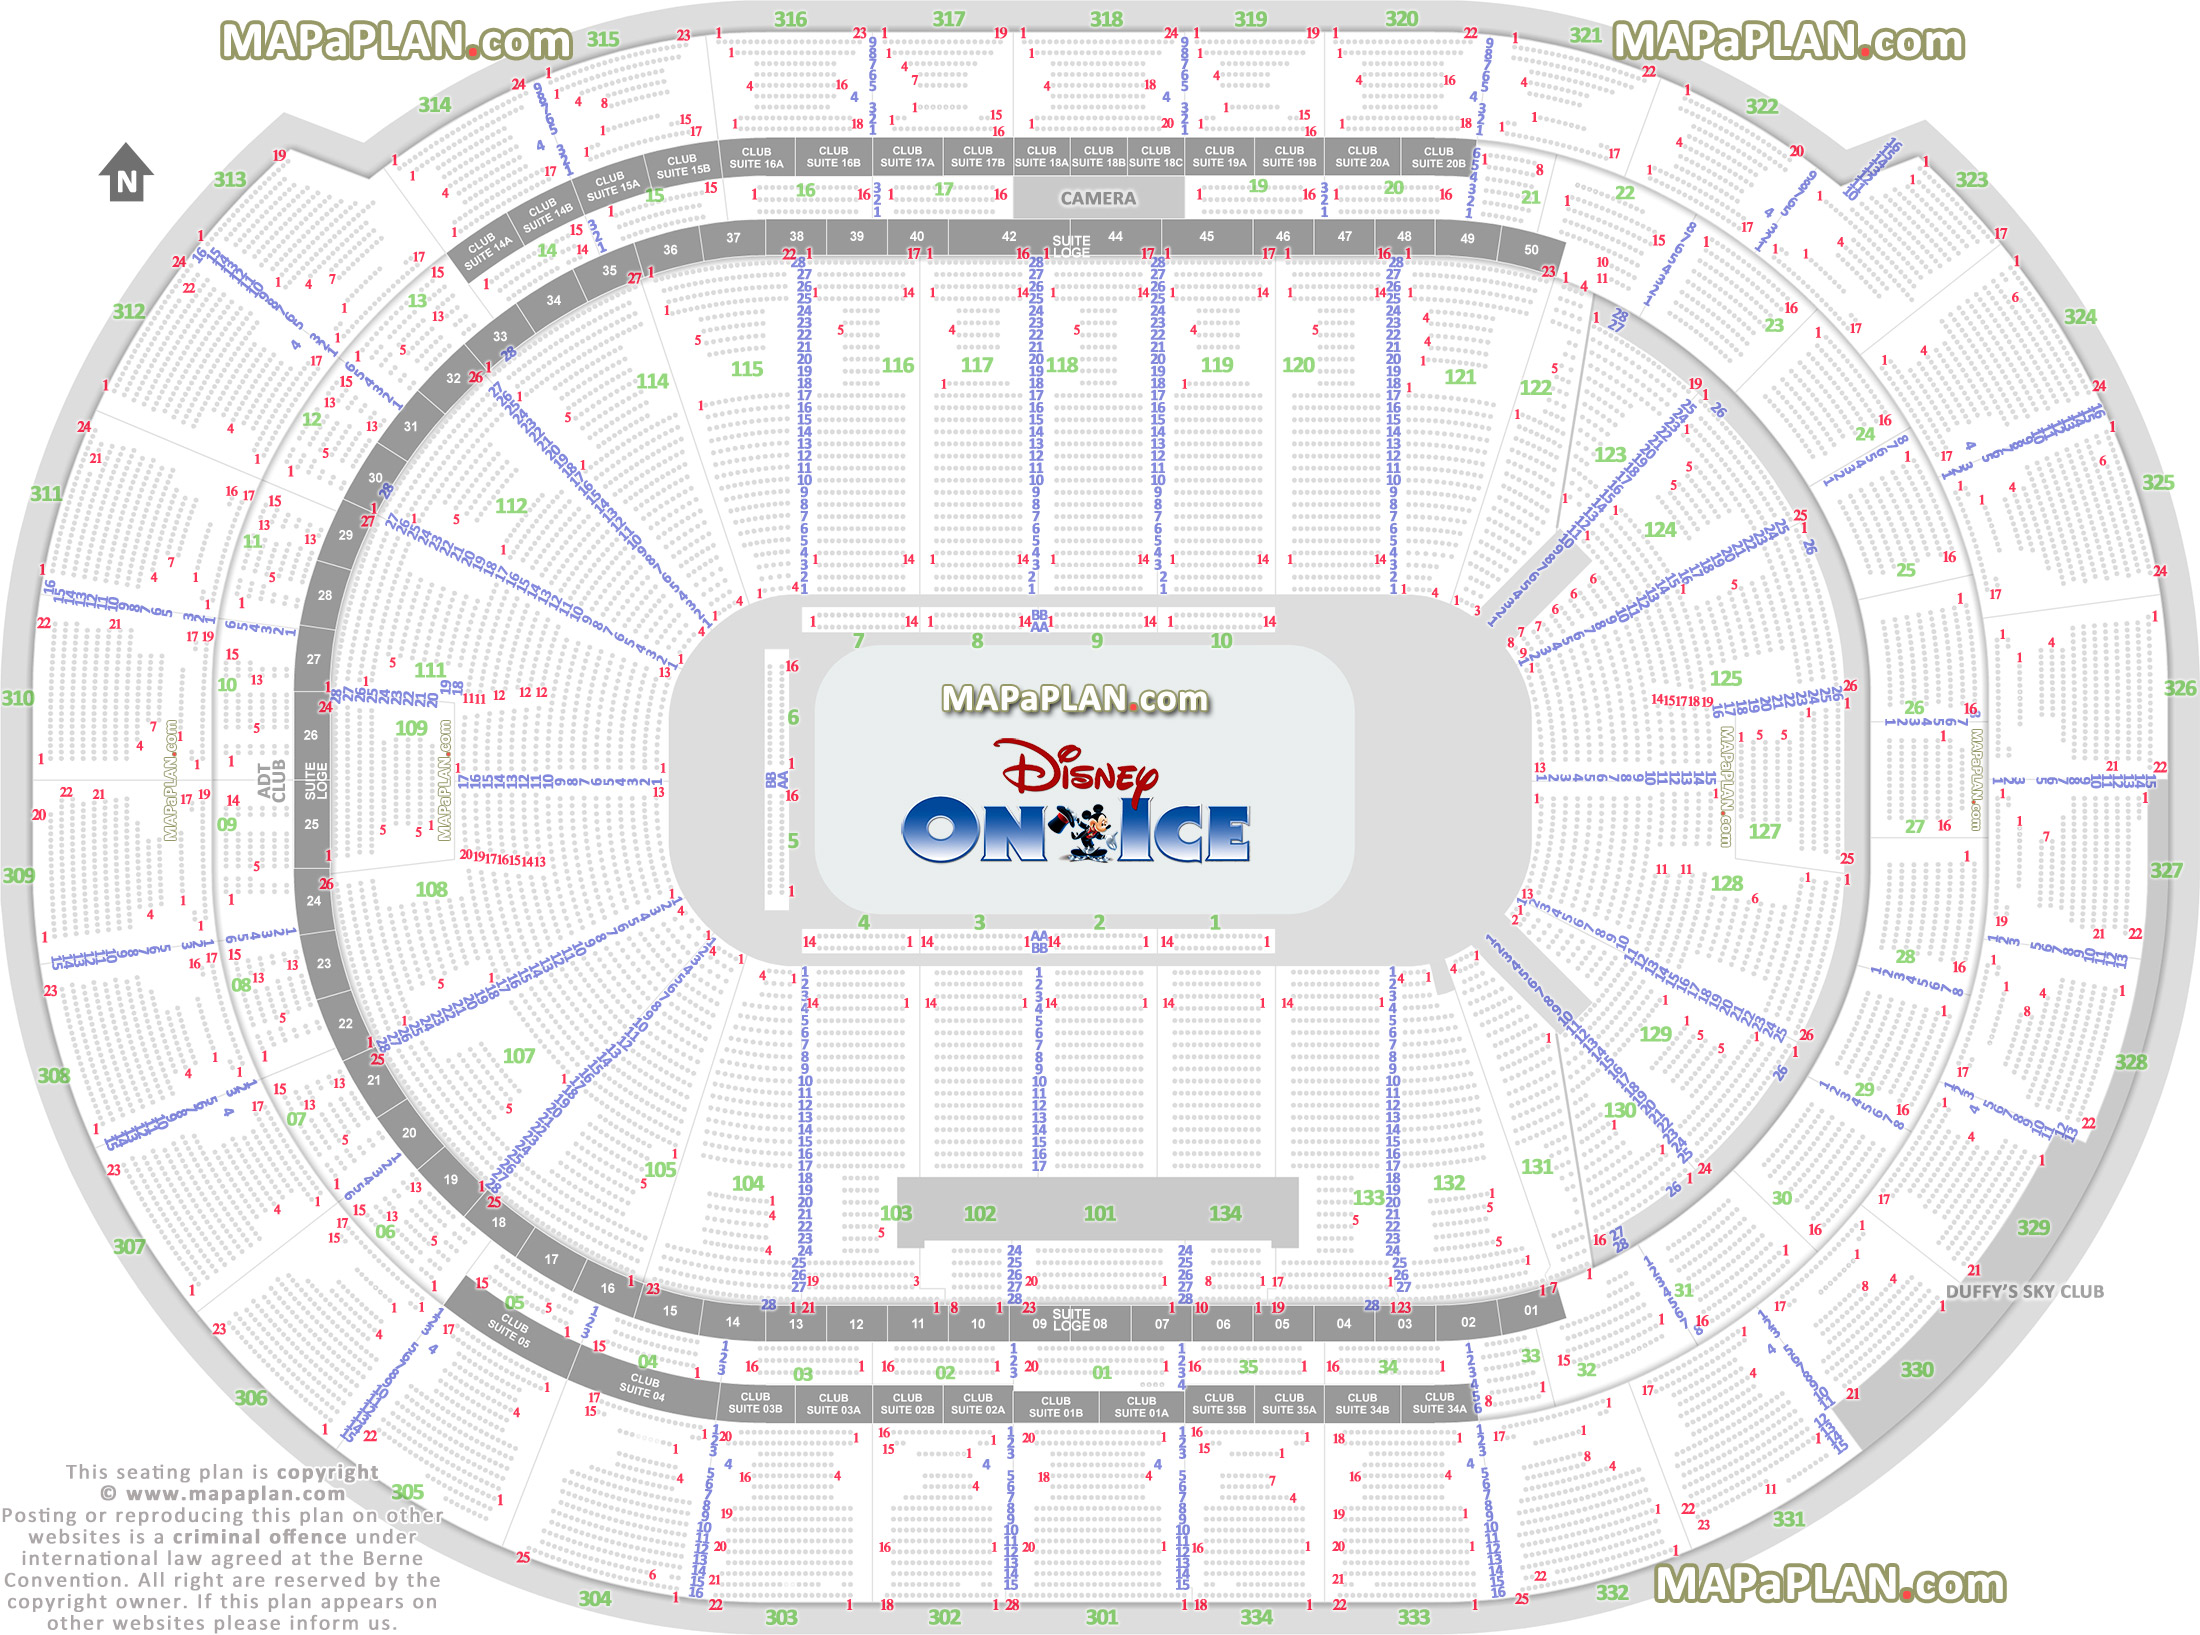 disney ice show seating arrangement review diagram best partial obstructed view finder precise aisle numbering location data Sunrise BBT Center seating chart